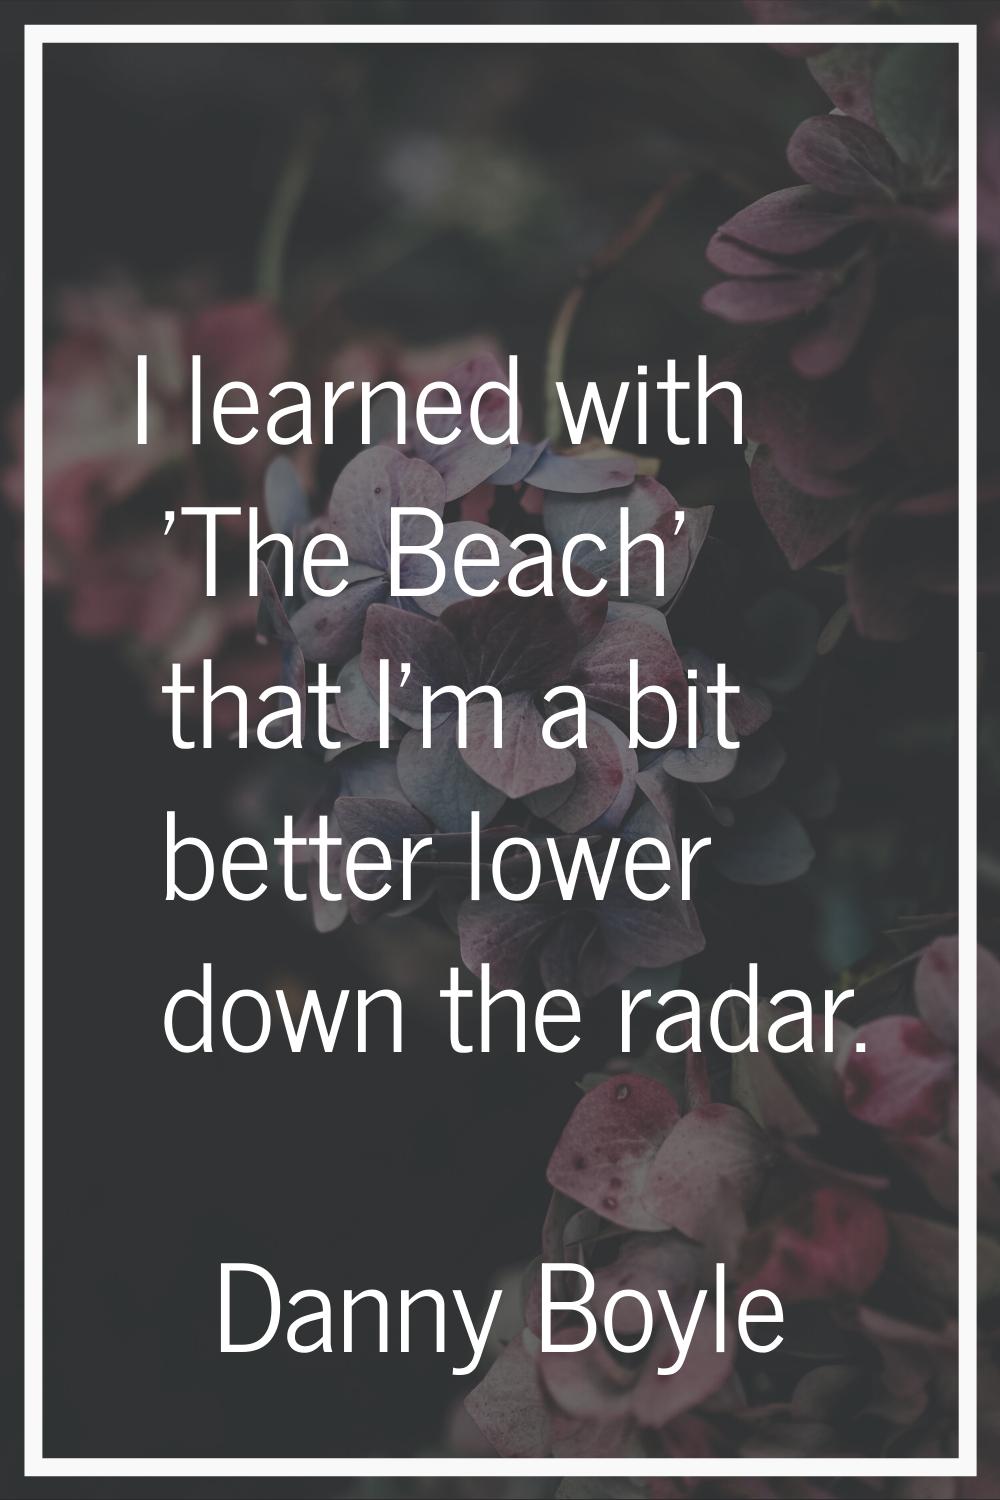 I learned with 'The Beach' that I'm a bit better lower down the radar.